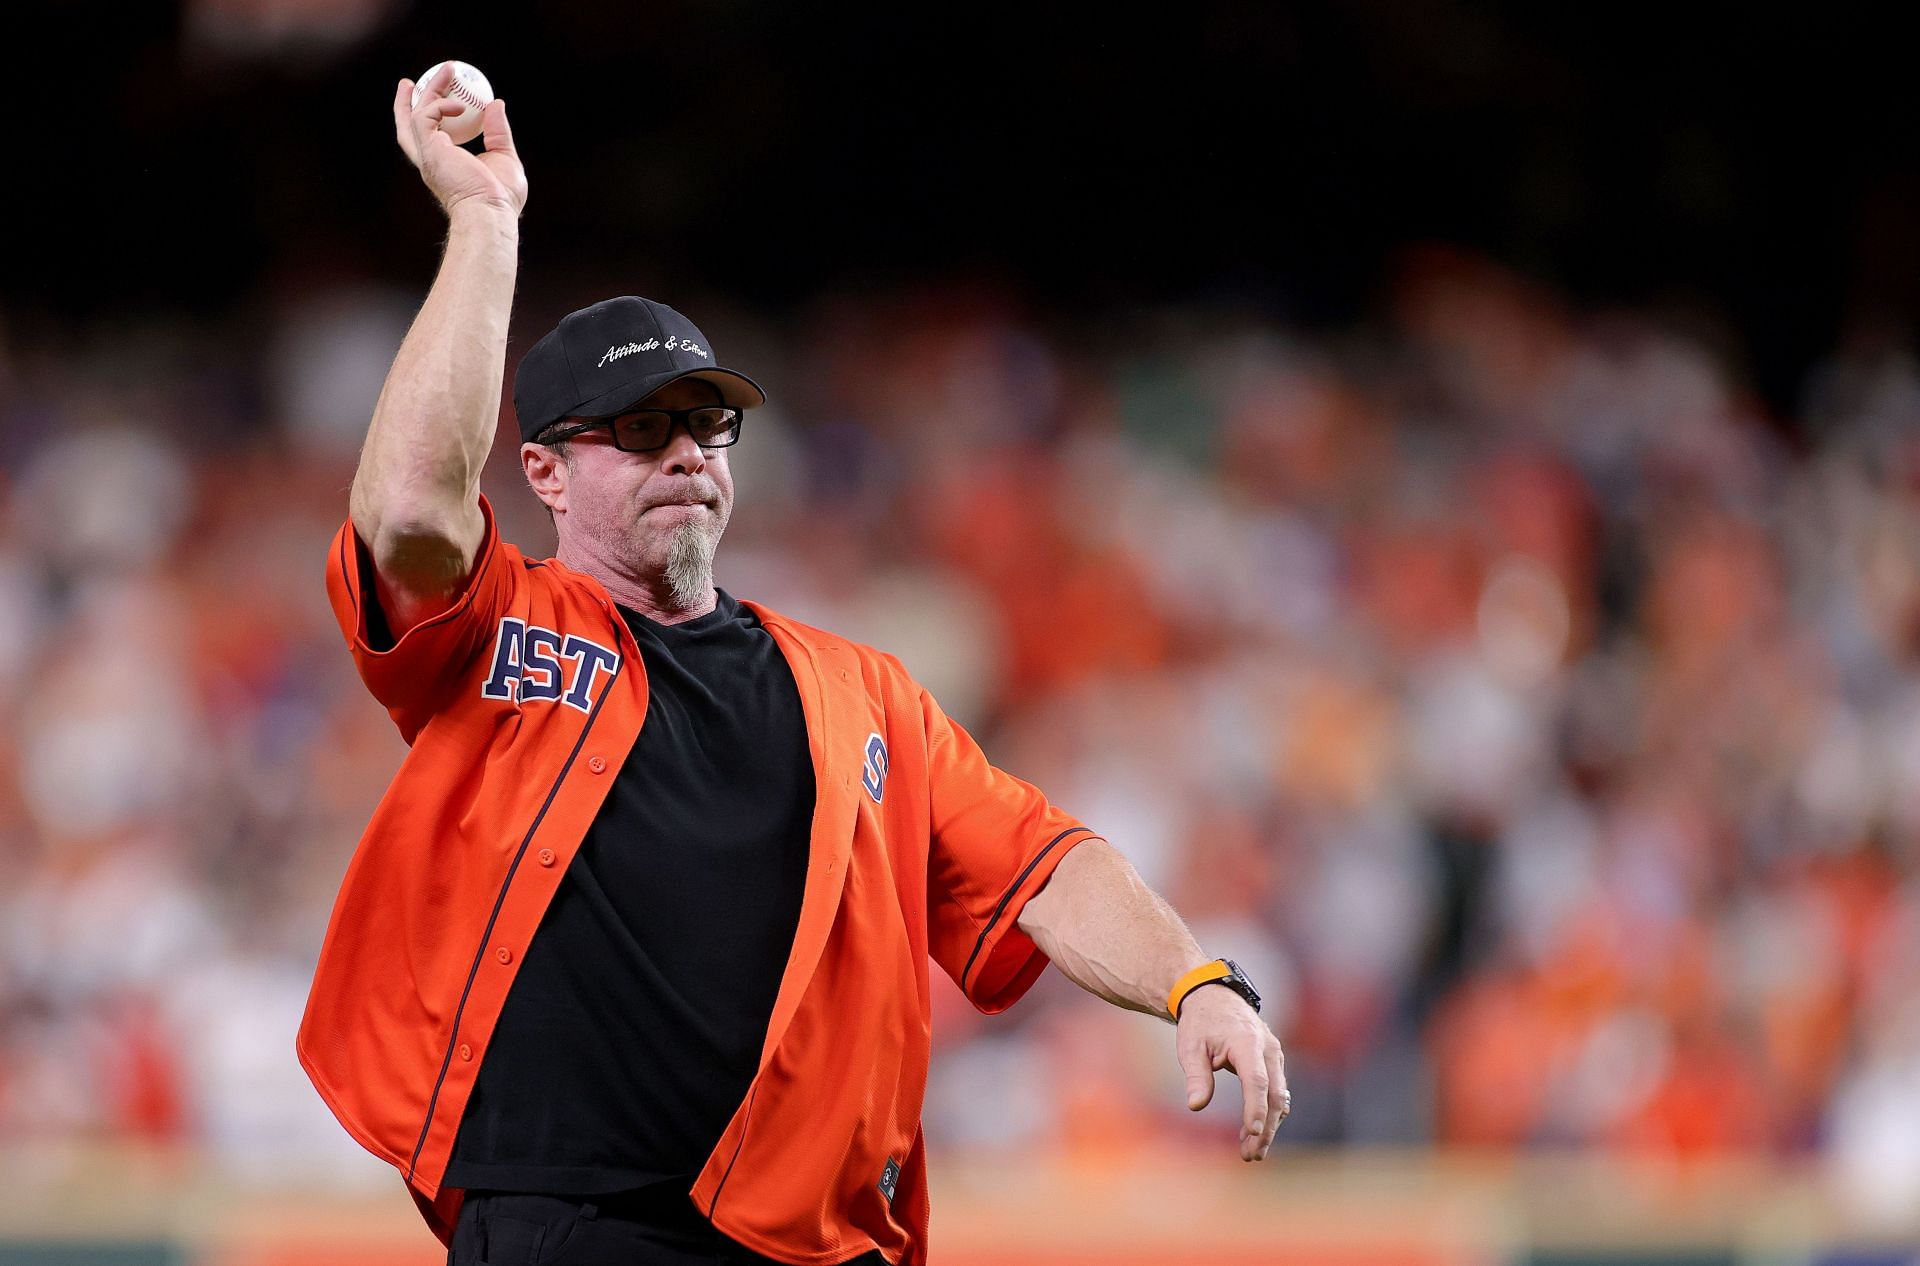 Astro and MLB Hall of Fame Member, Jeff Bagwell opens up about alcohol and  addiction recovery